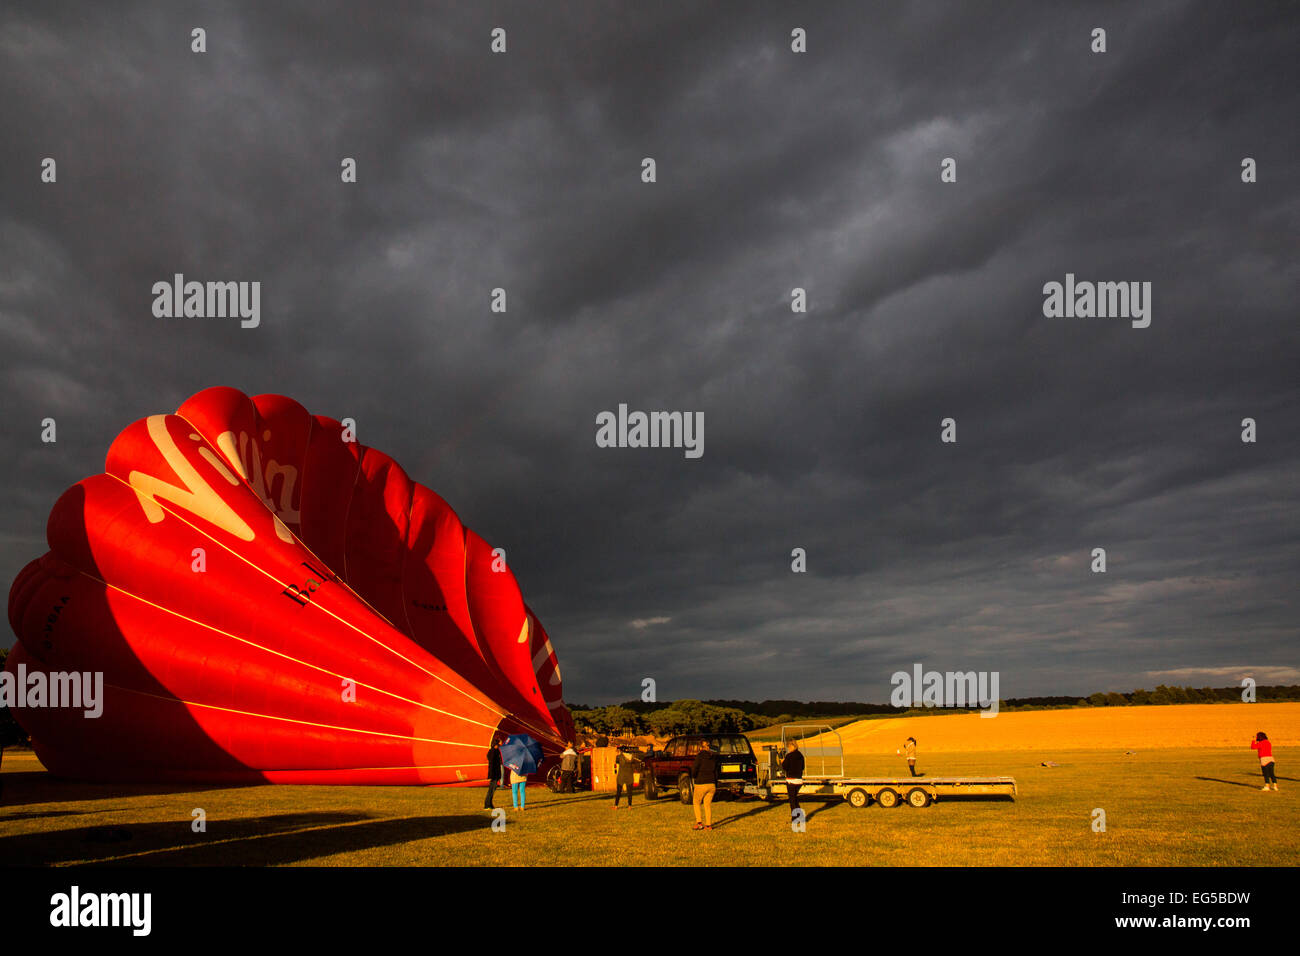 Teamwork preparation for tethered hot air balloon against dramatic sky, South Oxfordshire, England Stock Photo